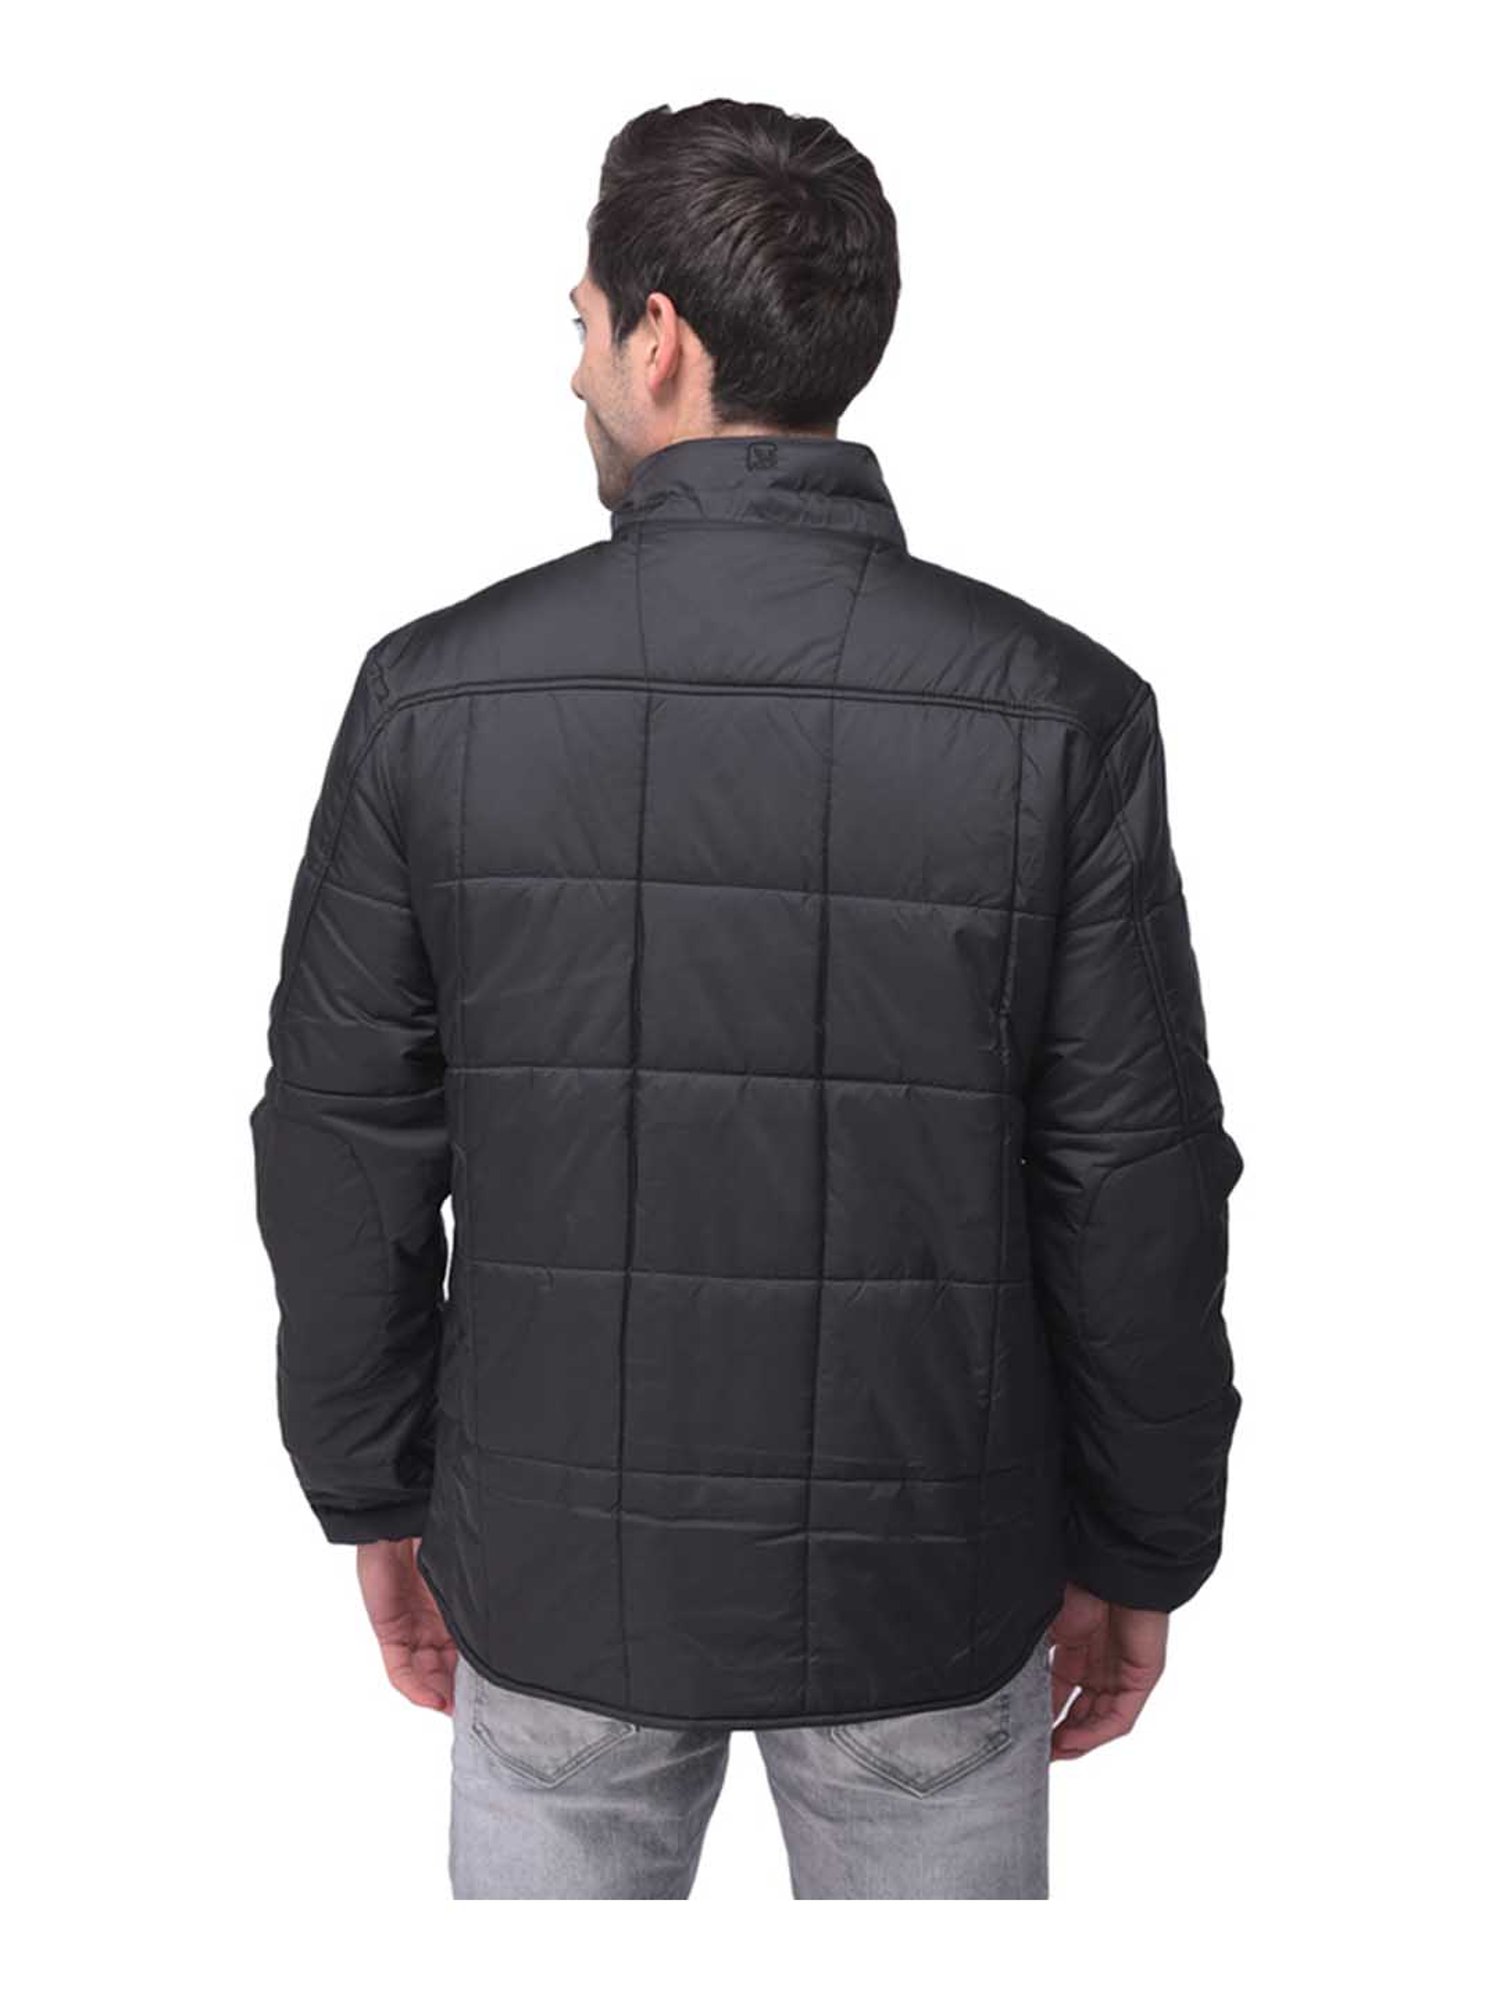 Cole Haan Men's Diamond Quilted Jacket, Black at Amazon Men's Clothing store